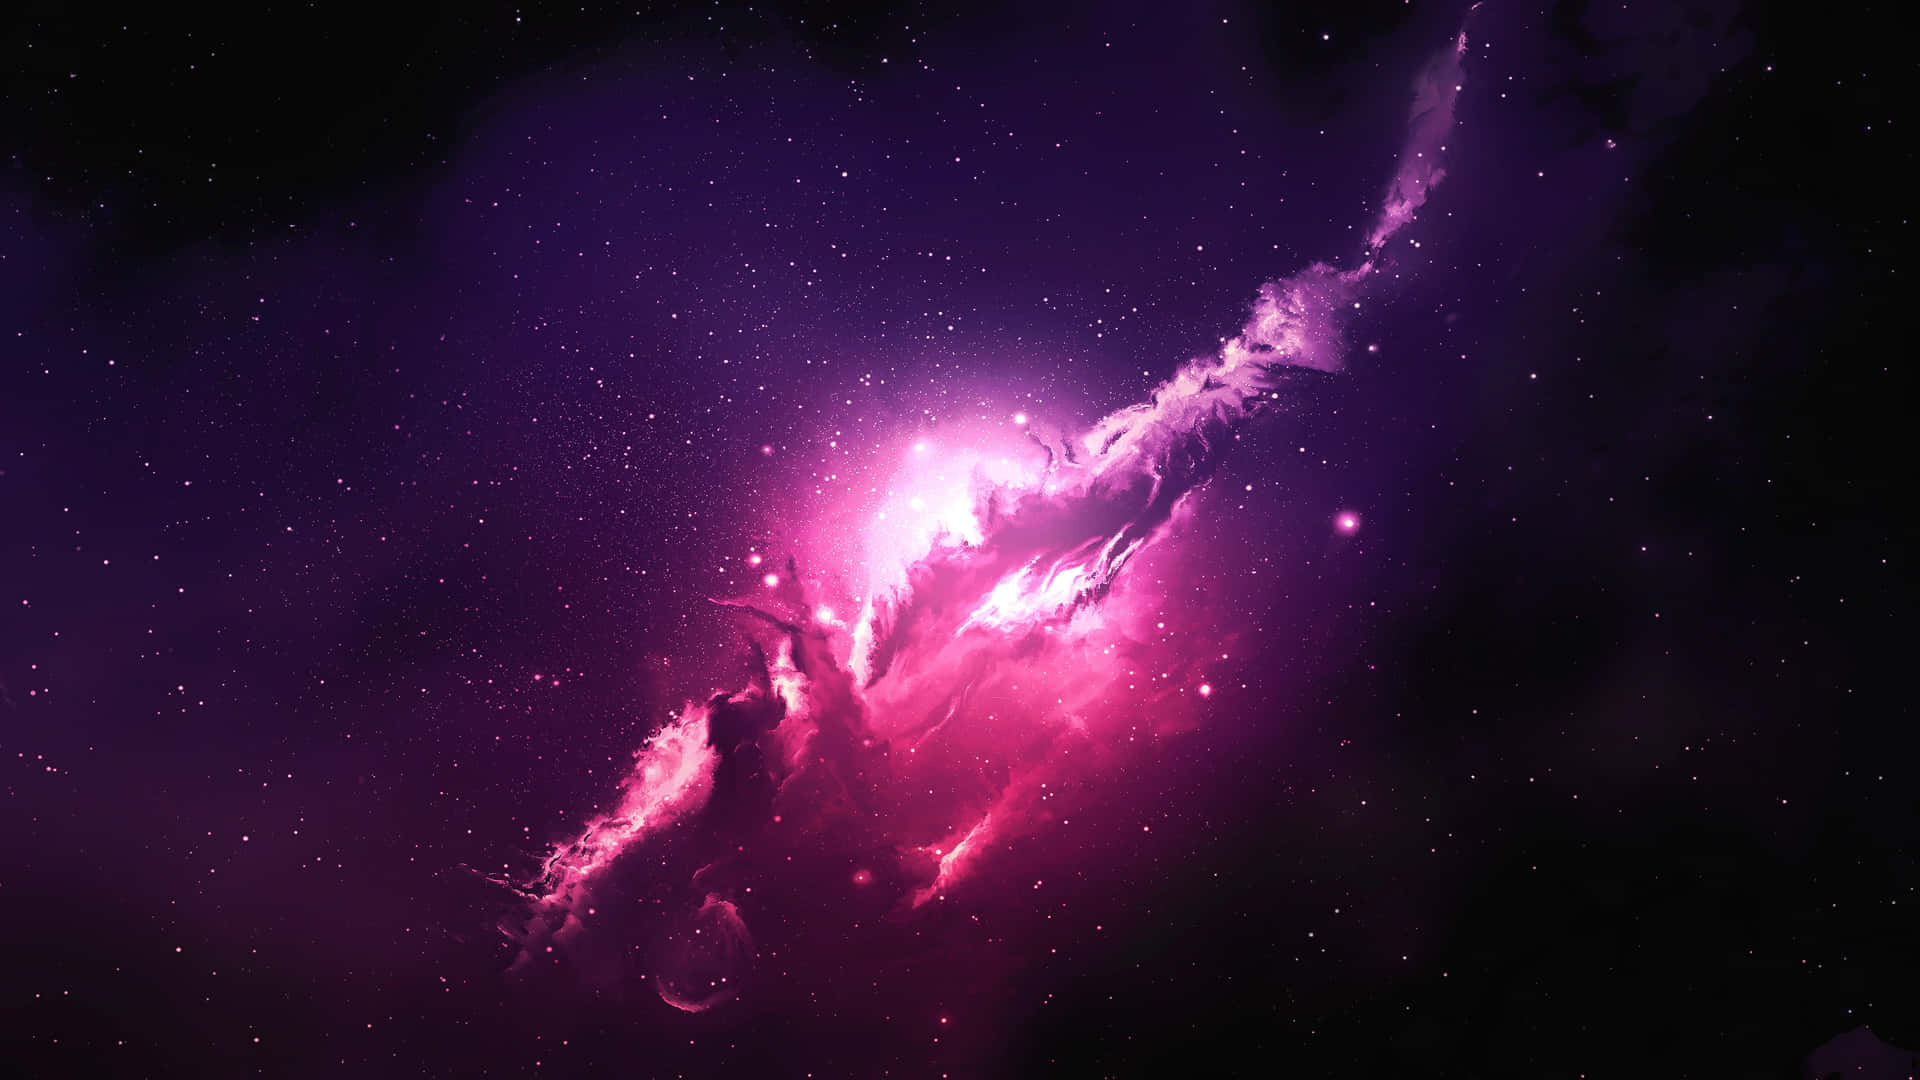 "A surreal pink space with a majestic, otherworldly feeling." Wallpaper